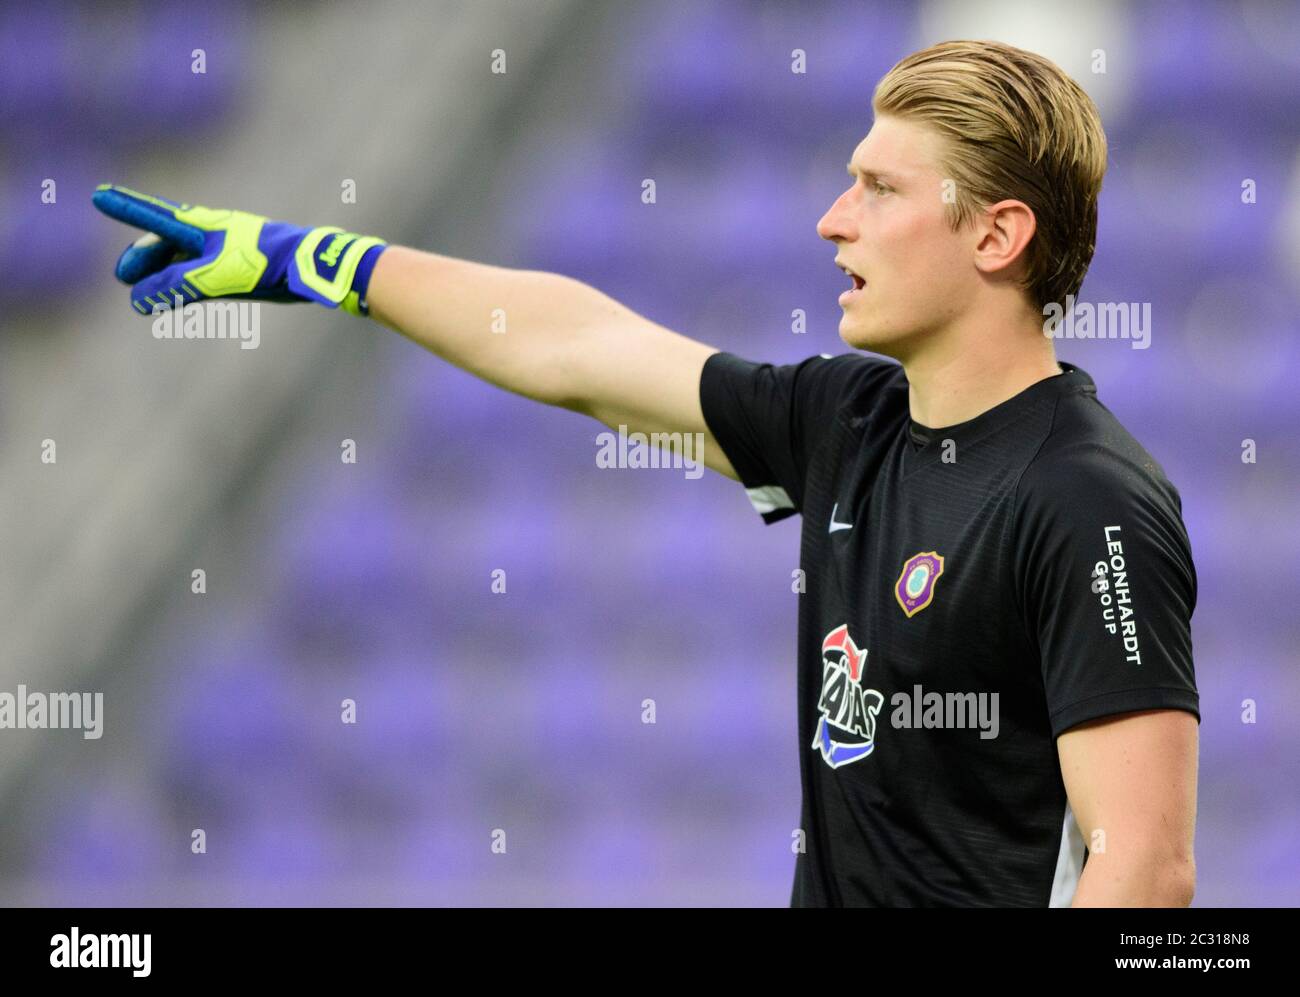 Aue, Germany. 17th June, 2020. Football: 2nd Bundesliga, FC Erzgebirge Aue - VfL Bochum, 32nd matchday, at the Sparkassen-Erzgebirgsstadion. Aue goalkeeper Robert Jendrusch. Credit: Robert Michael/dpa-Zentralbild/dpa - IMPORTANT NOTE: In accordance with the regulations of the DFL Deutsche Fußball Liga and the DFB Deutscher Fußball-Bund, it is prohibited to exploit or have exploited in the stadium and/or from the game taken photographs in the form of sequence images and/or video-like photo series./dpa/Alamy Live News Stock Photo